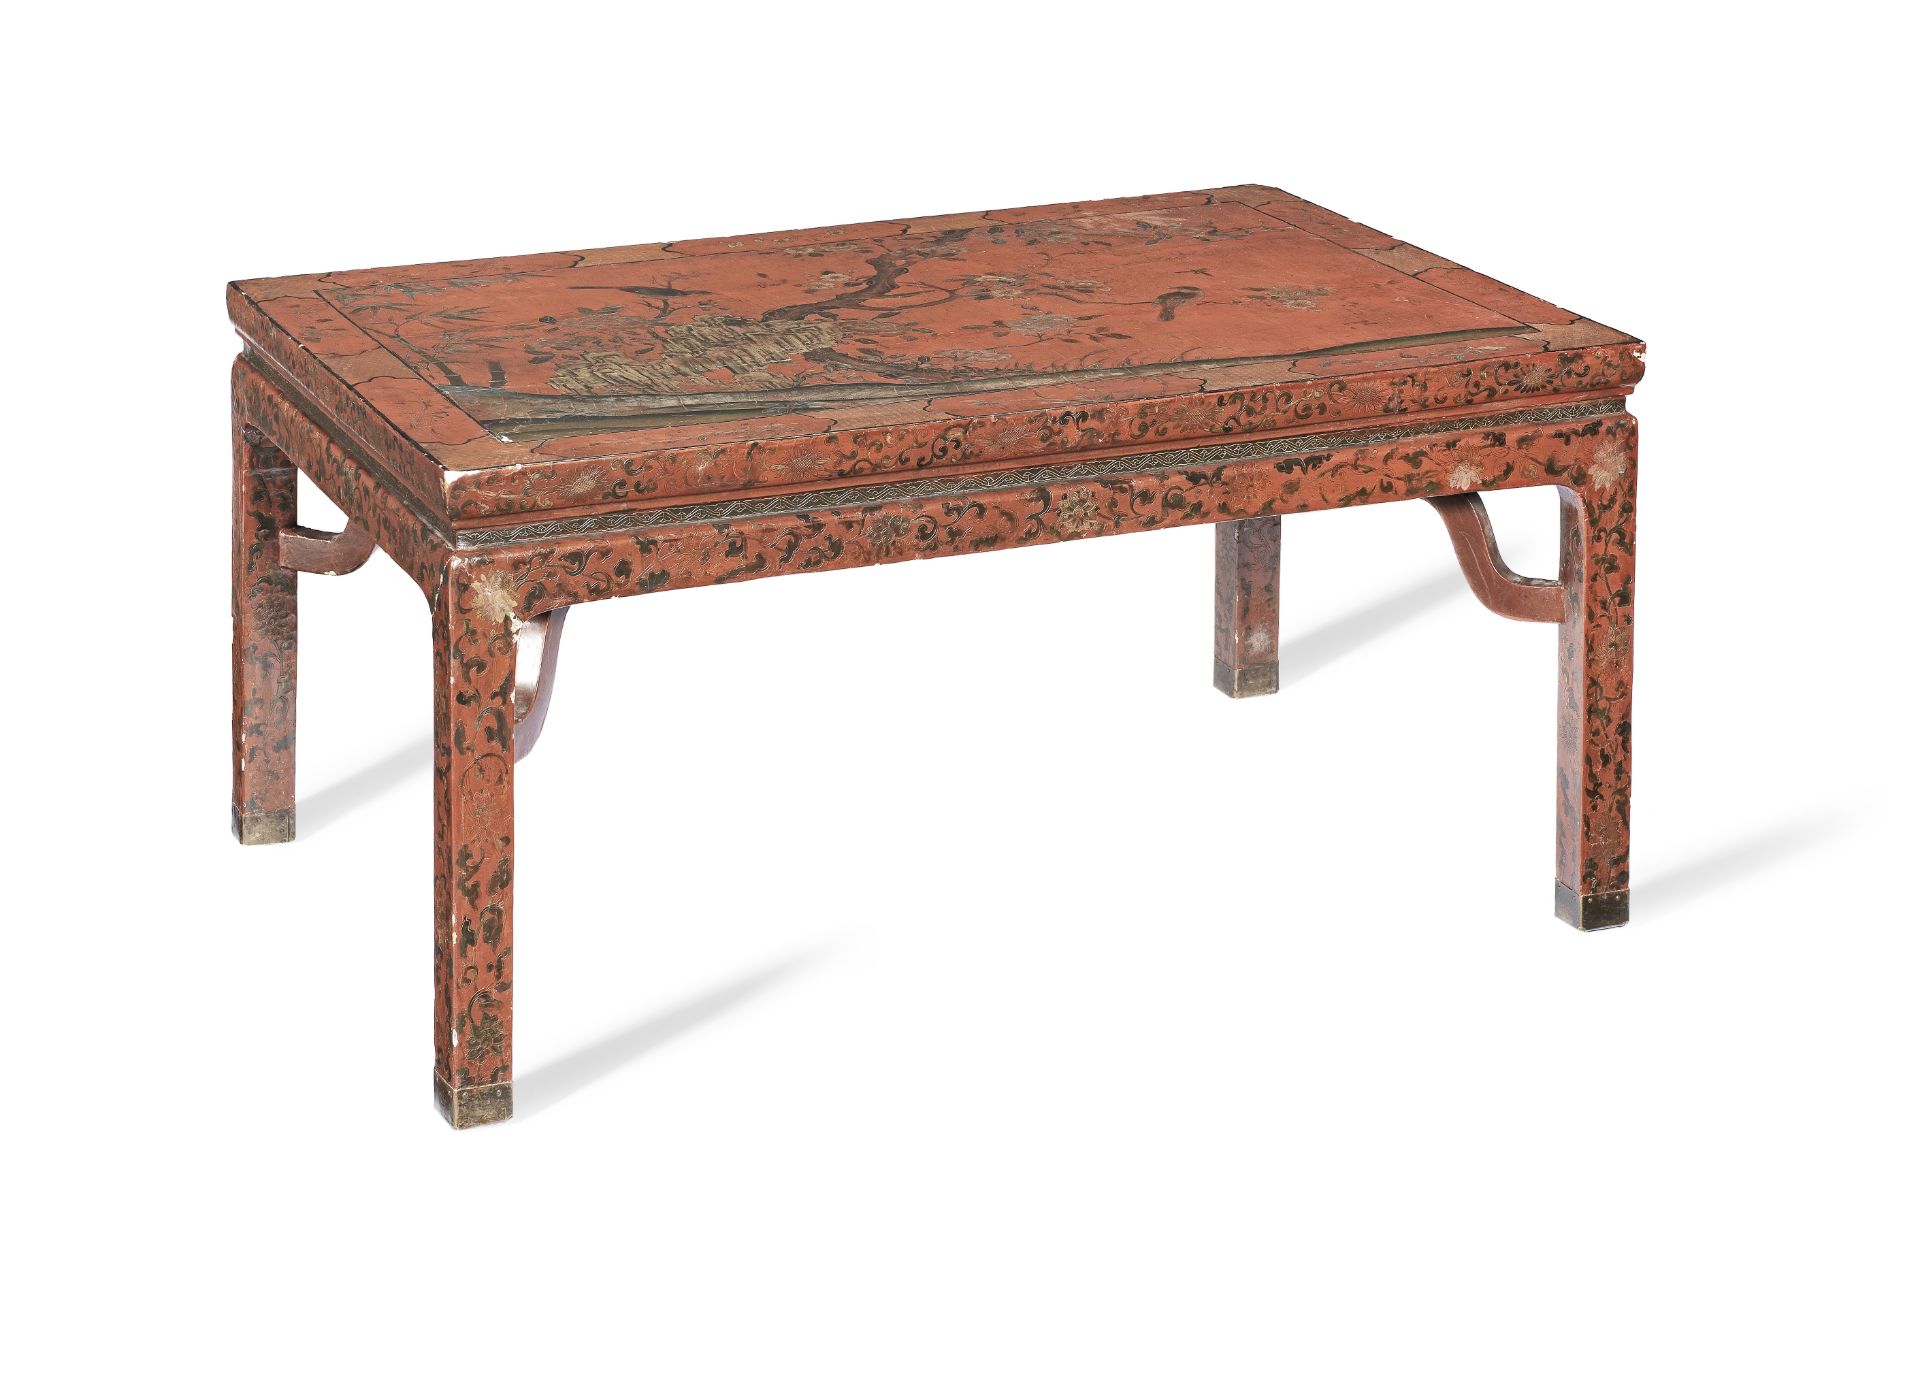 A POLYCHROME LACQUER TABLE 17th century